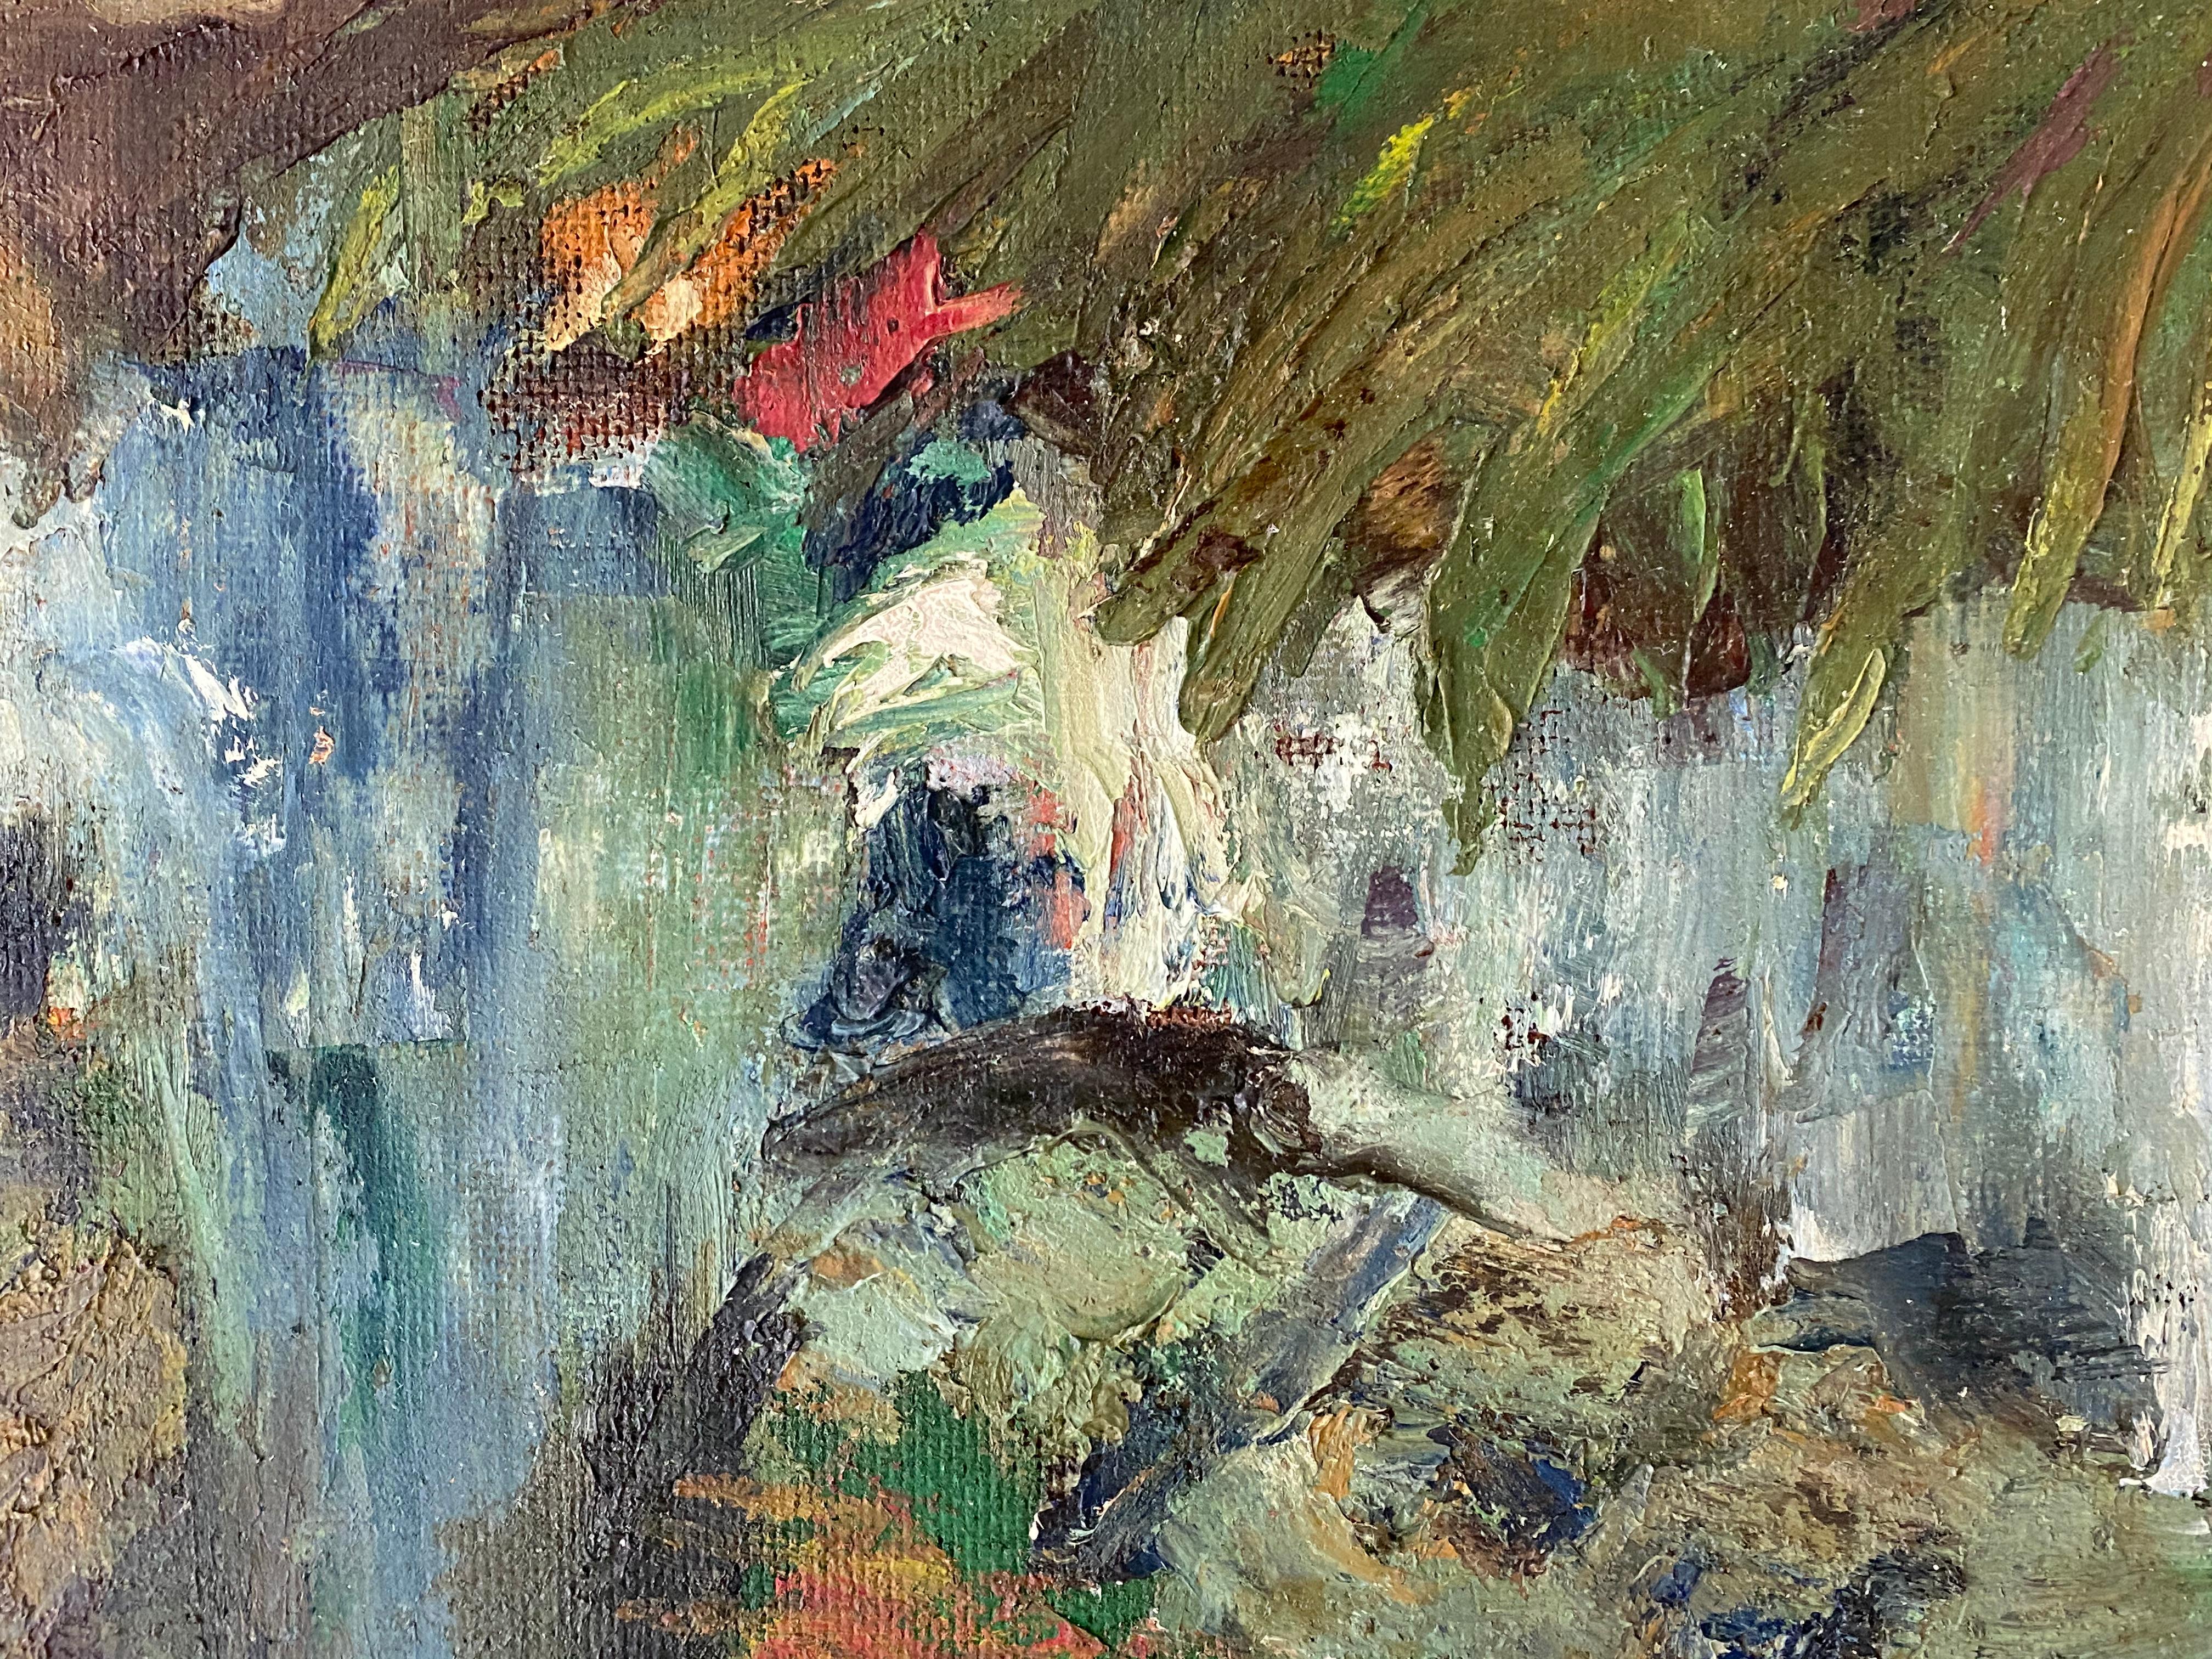 Mid Century Abstract Stream Painting by Gibbs C.1968

Original oil on panel

Dimensions 10